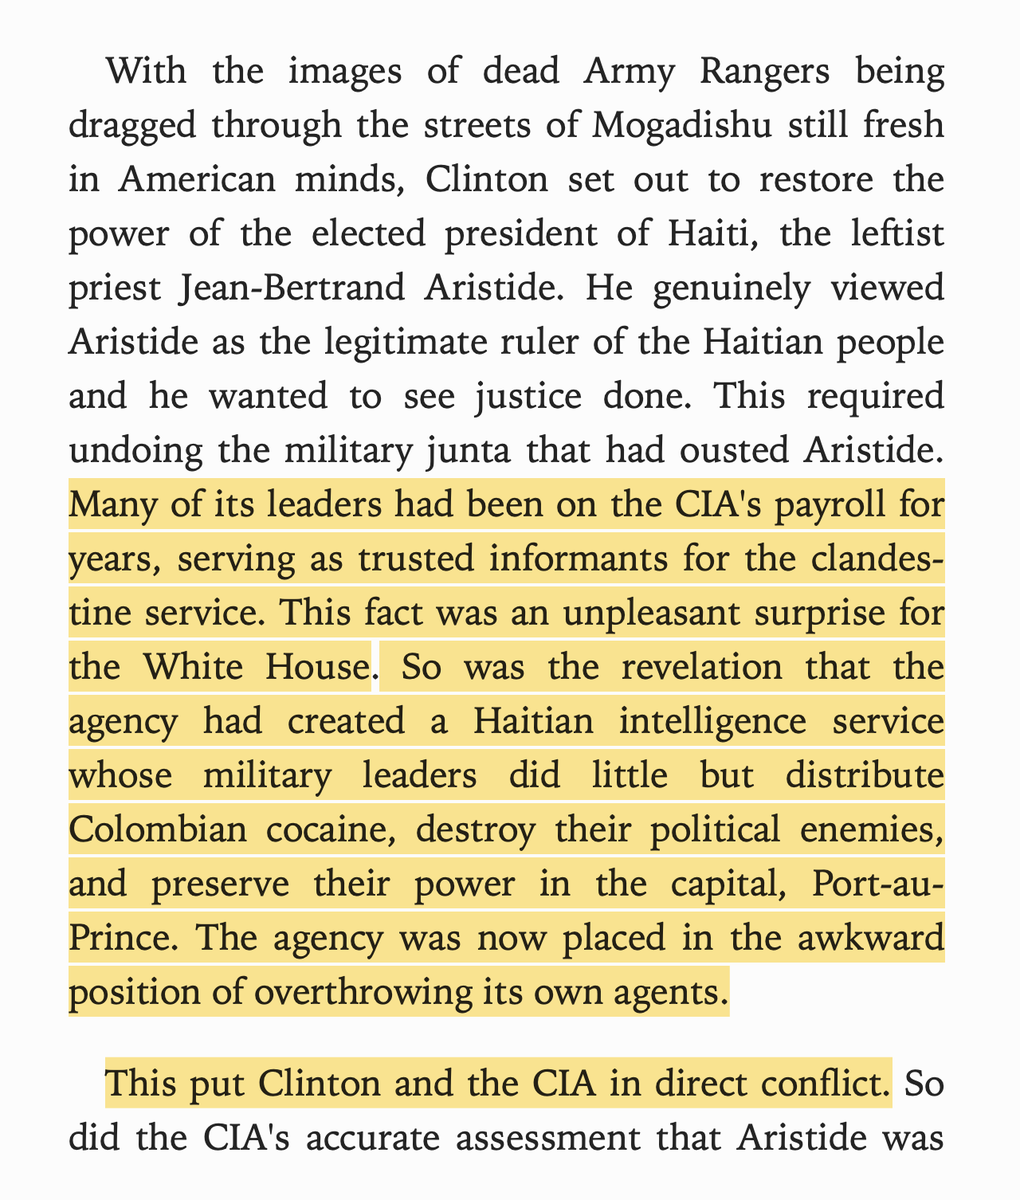 US built a Haitian intelligence service that did nothing but destroy its enemies and sell cocaine. They then decided to overthrow their own agents.